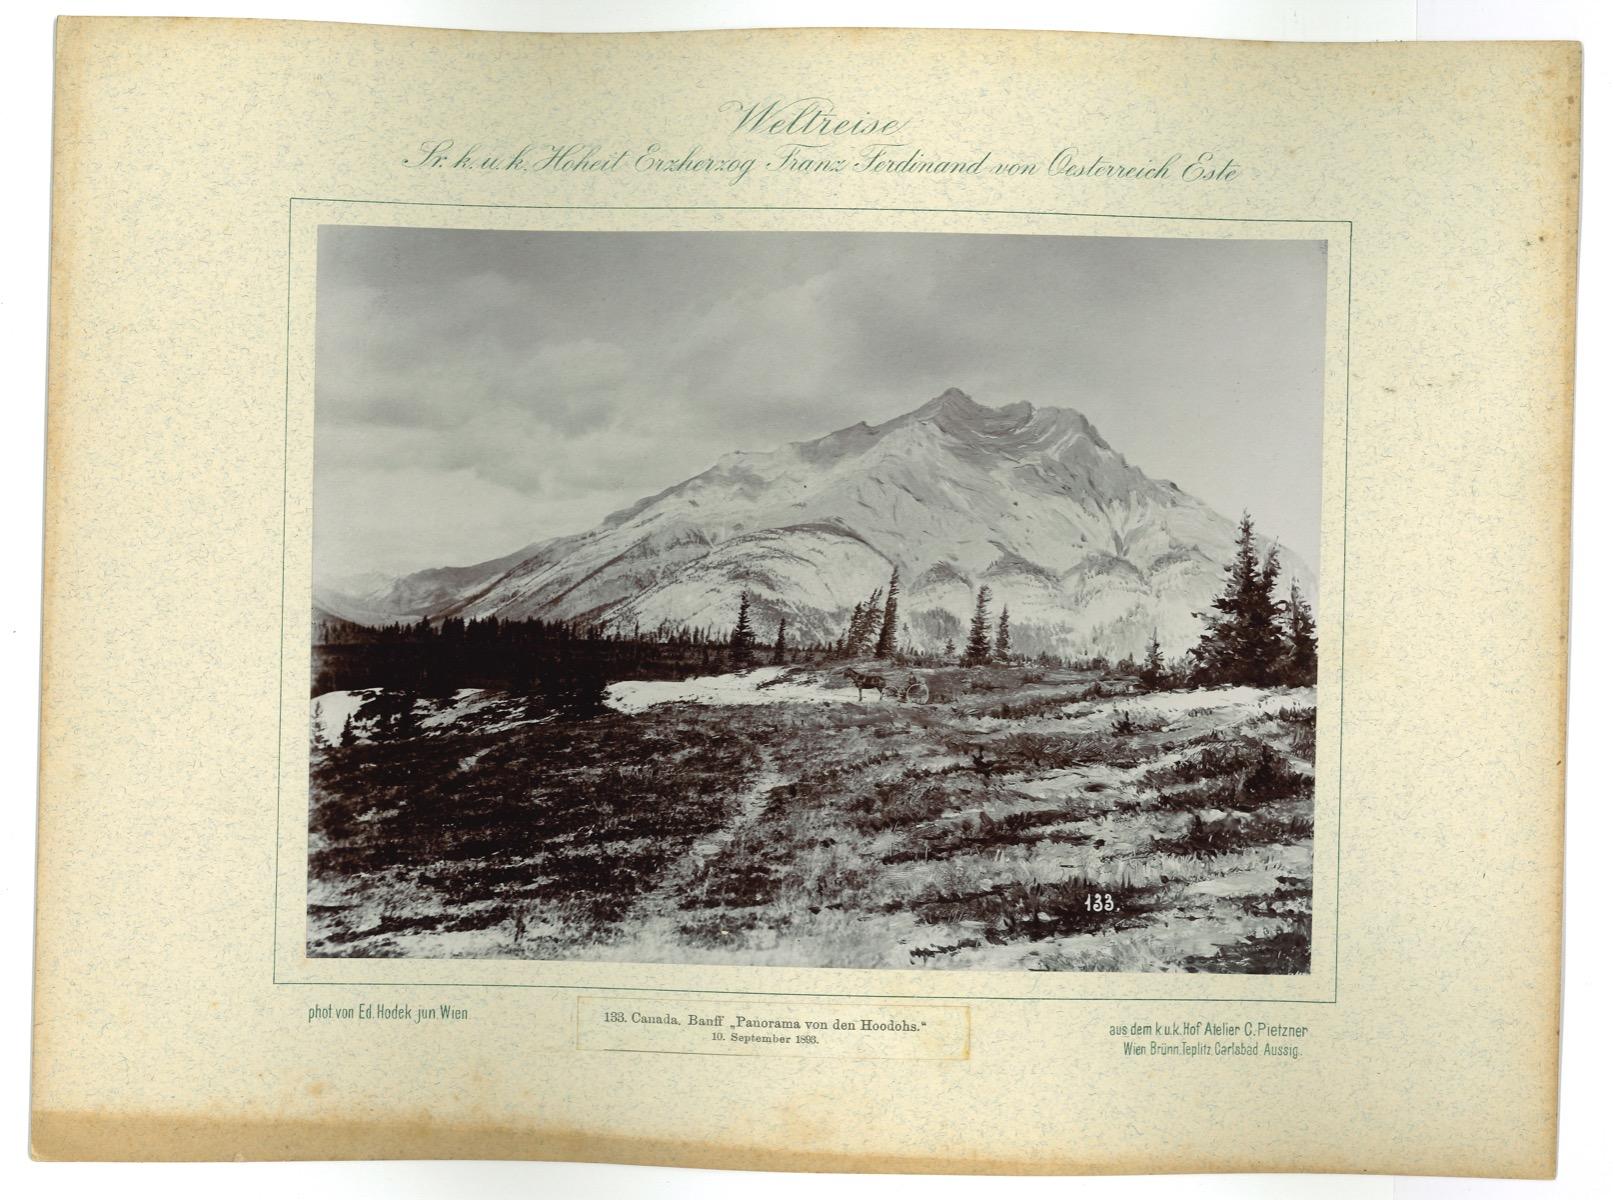 Unknown Landscape Photograph - Canada. Bauff panorama from the Hoodoh - Original Vintage Photo - 1893